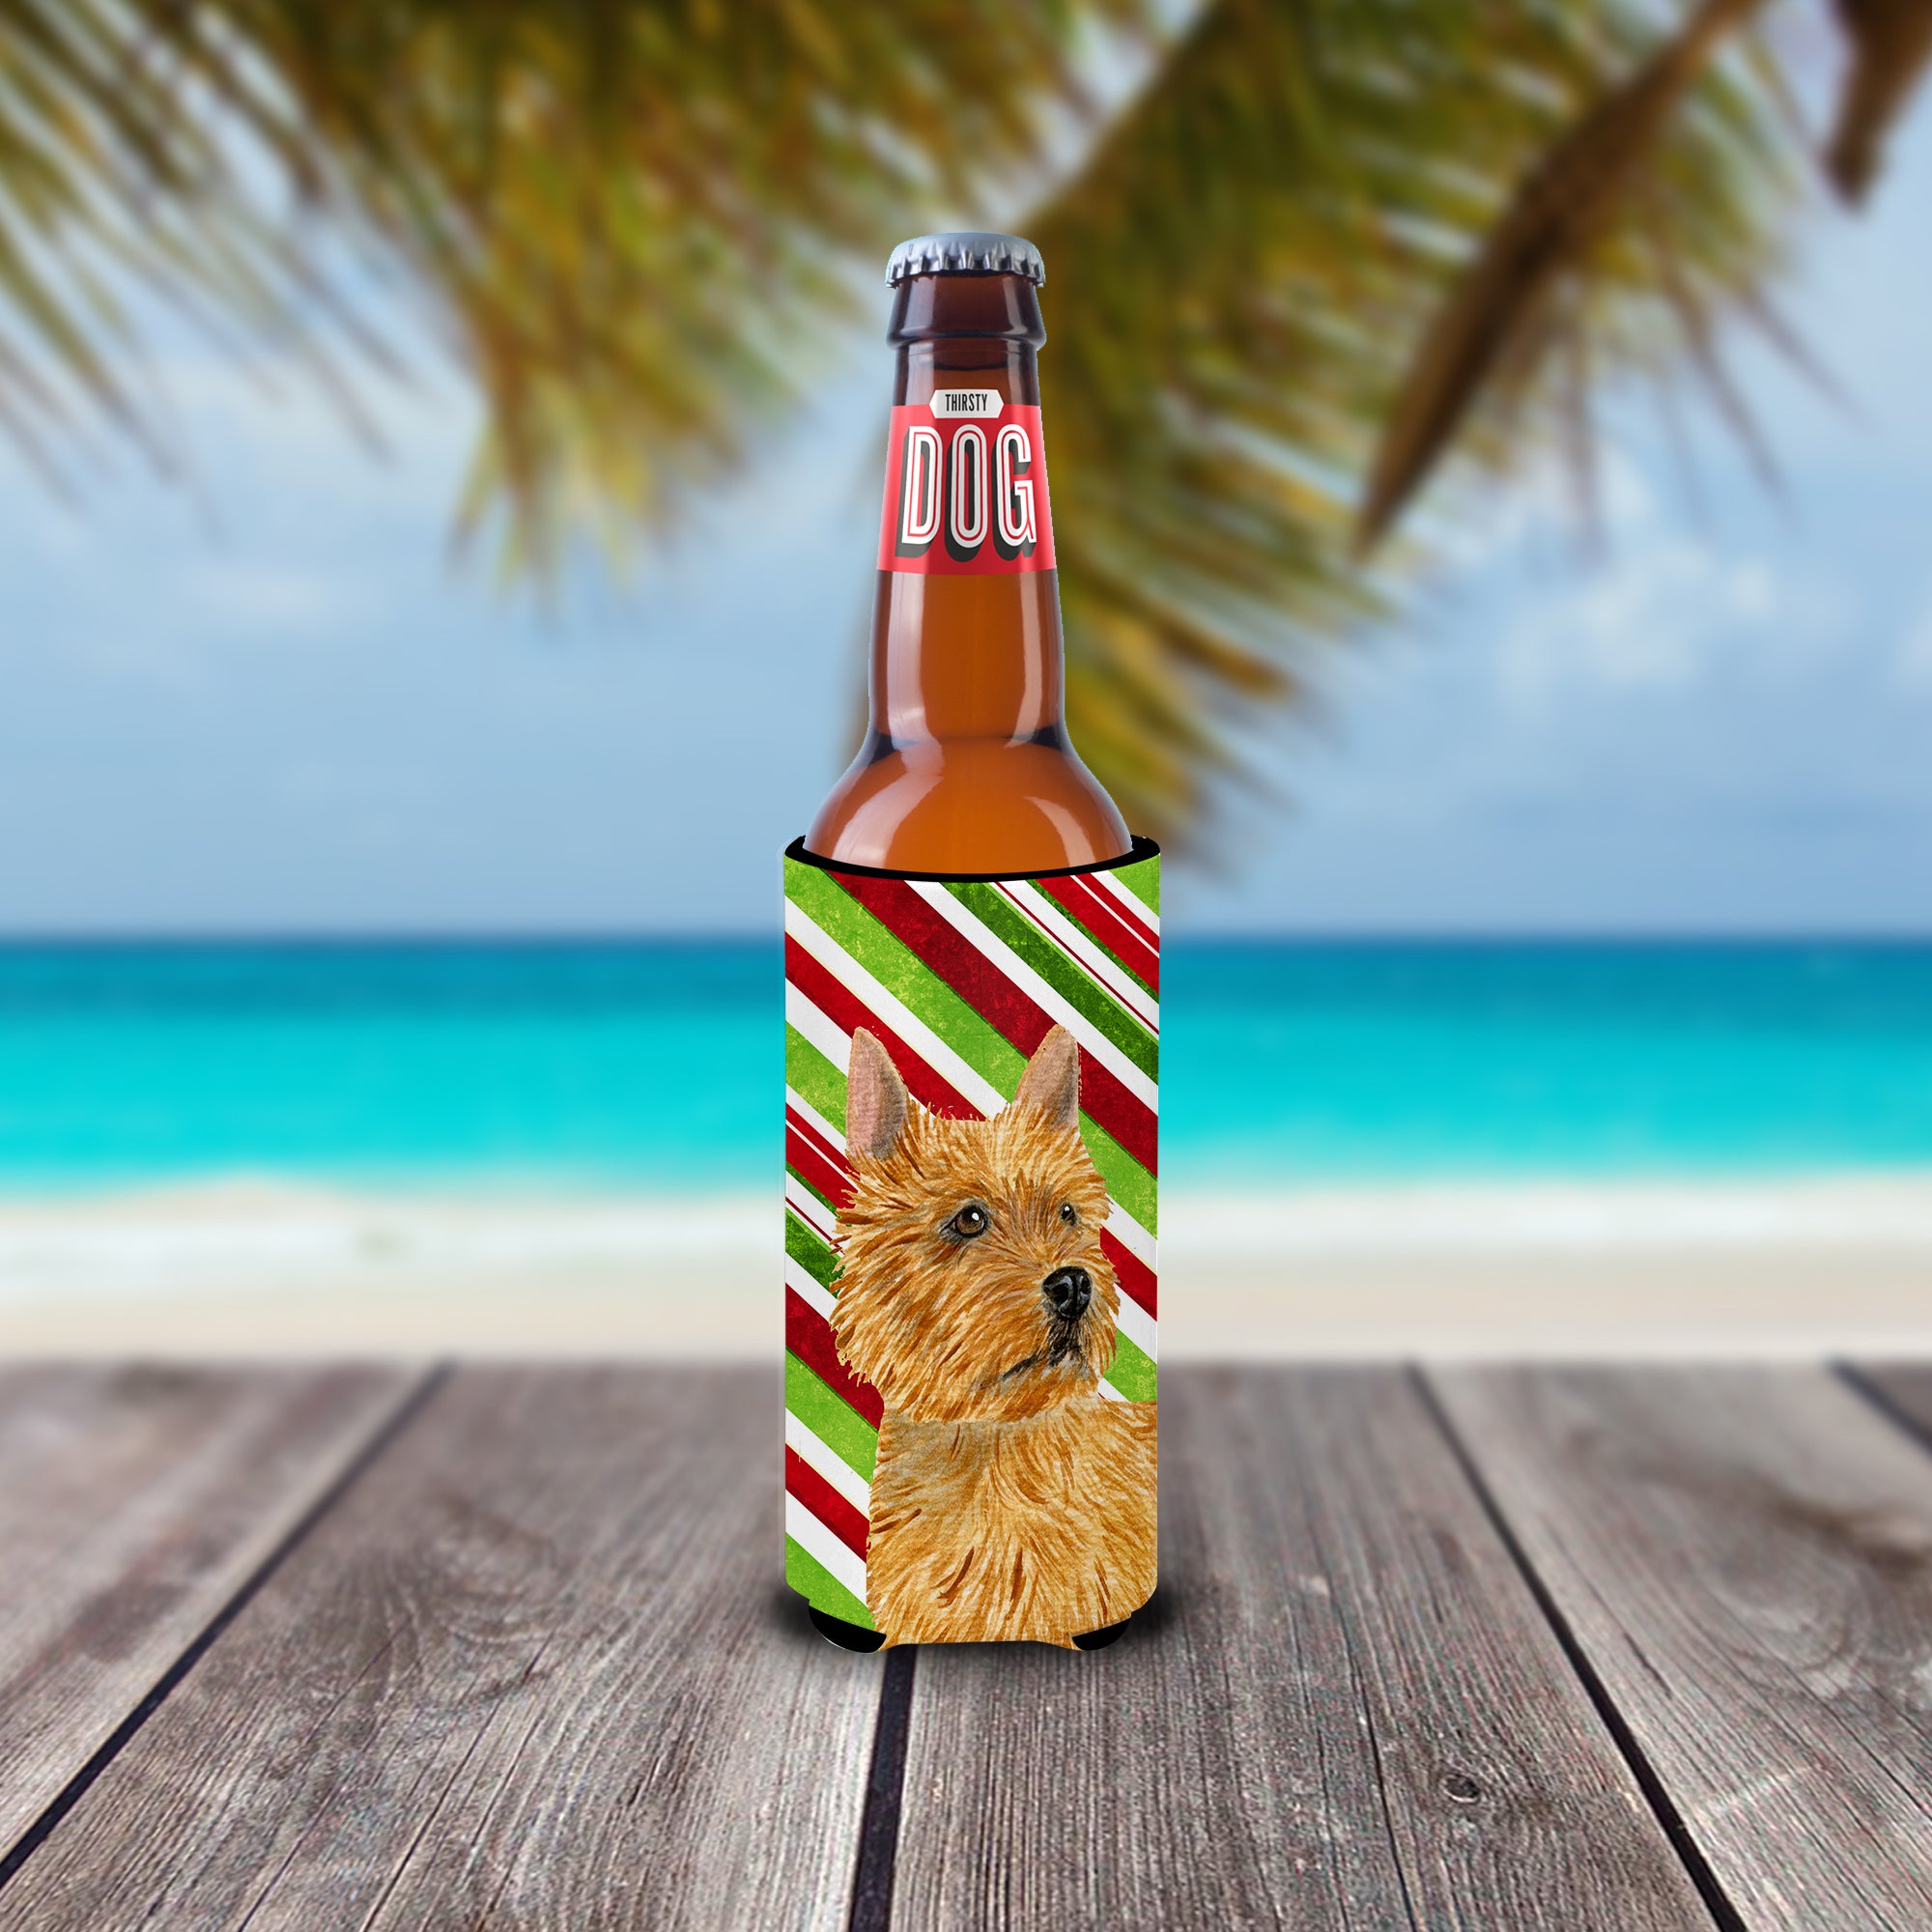 Norwich Terrier Candy Cane Holiday Christmas Ultra Beverage Insulators for slim cans SS4568MUK.